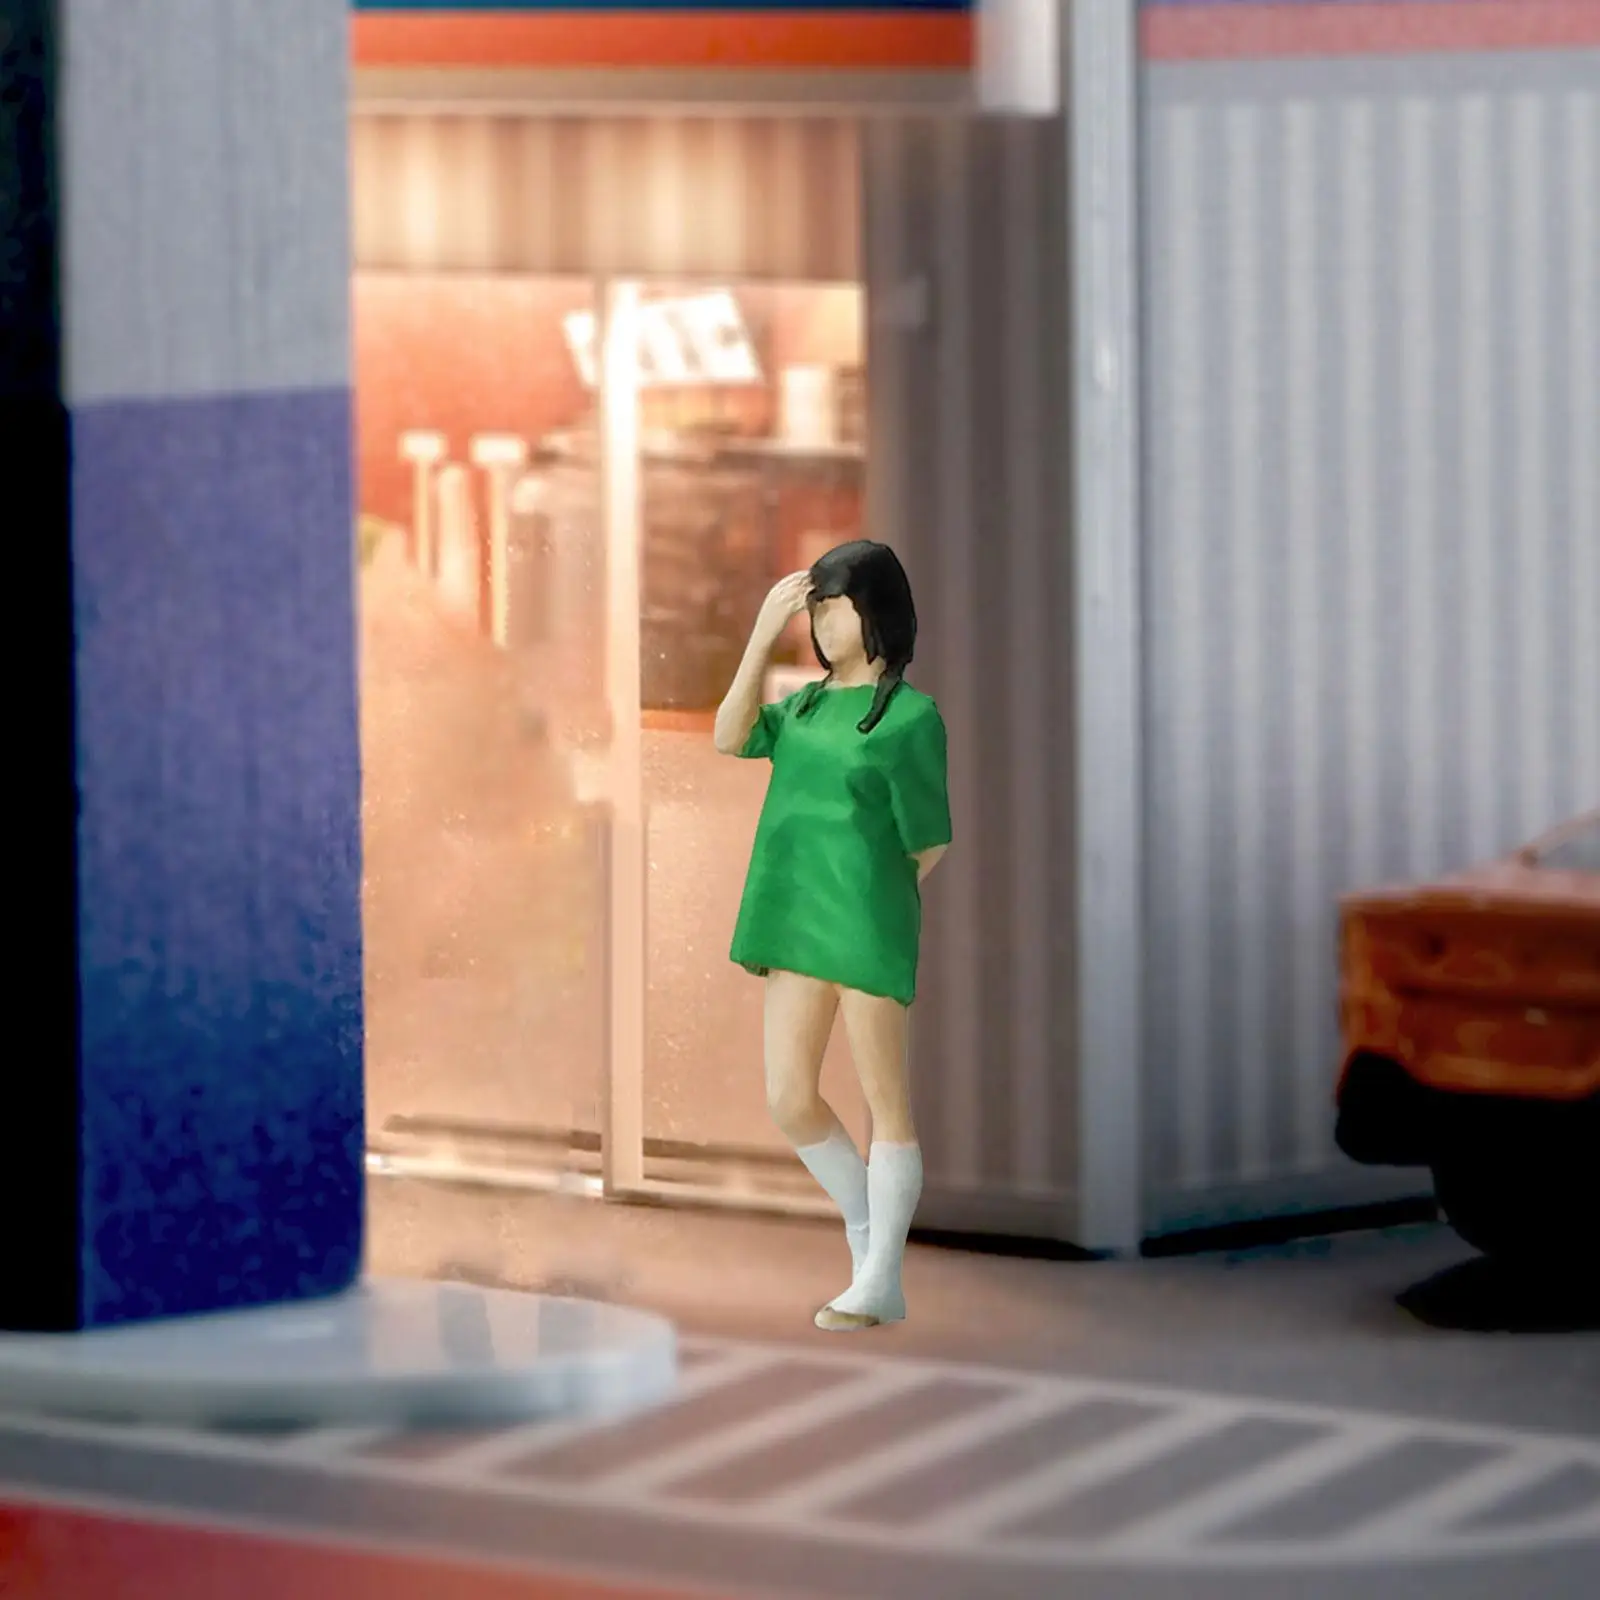 1/64 Scale People Figures Train Park Street People Figures Resin for Diorama Dollhouse Photography Props Scenery Landscape Decor